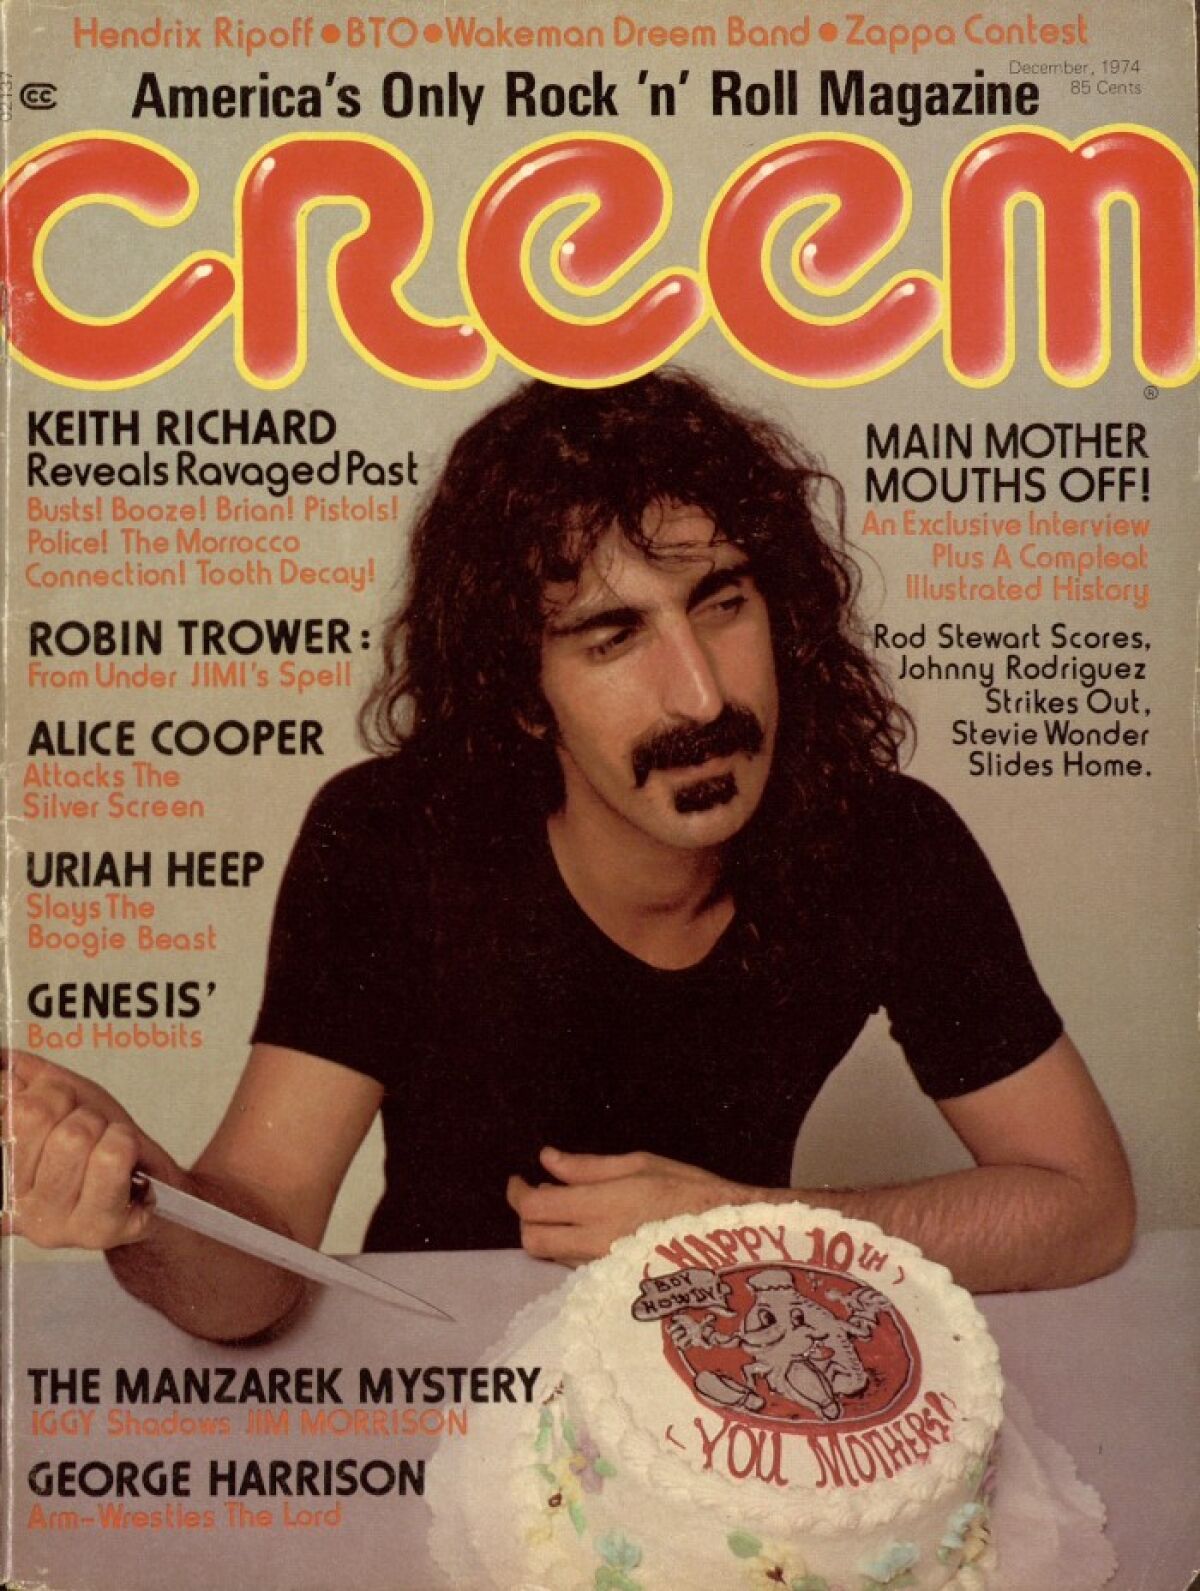 Once extinct, rock magazine Creem tries to be vital again - Los Angeles Times